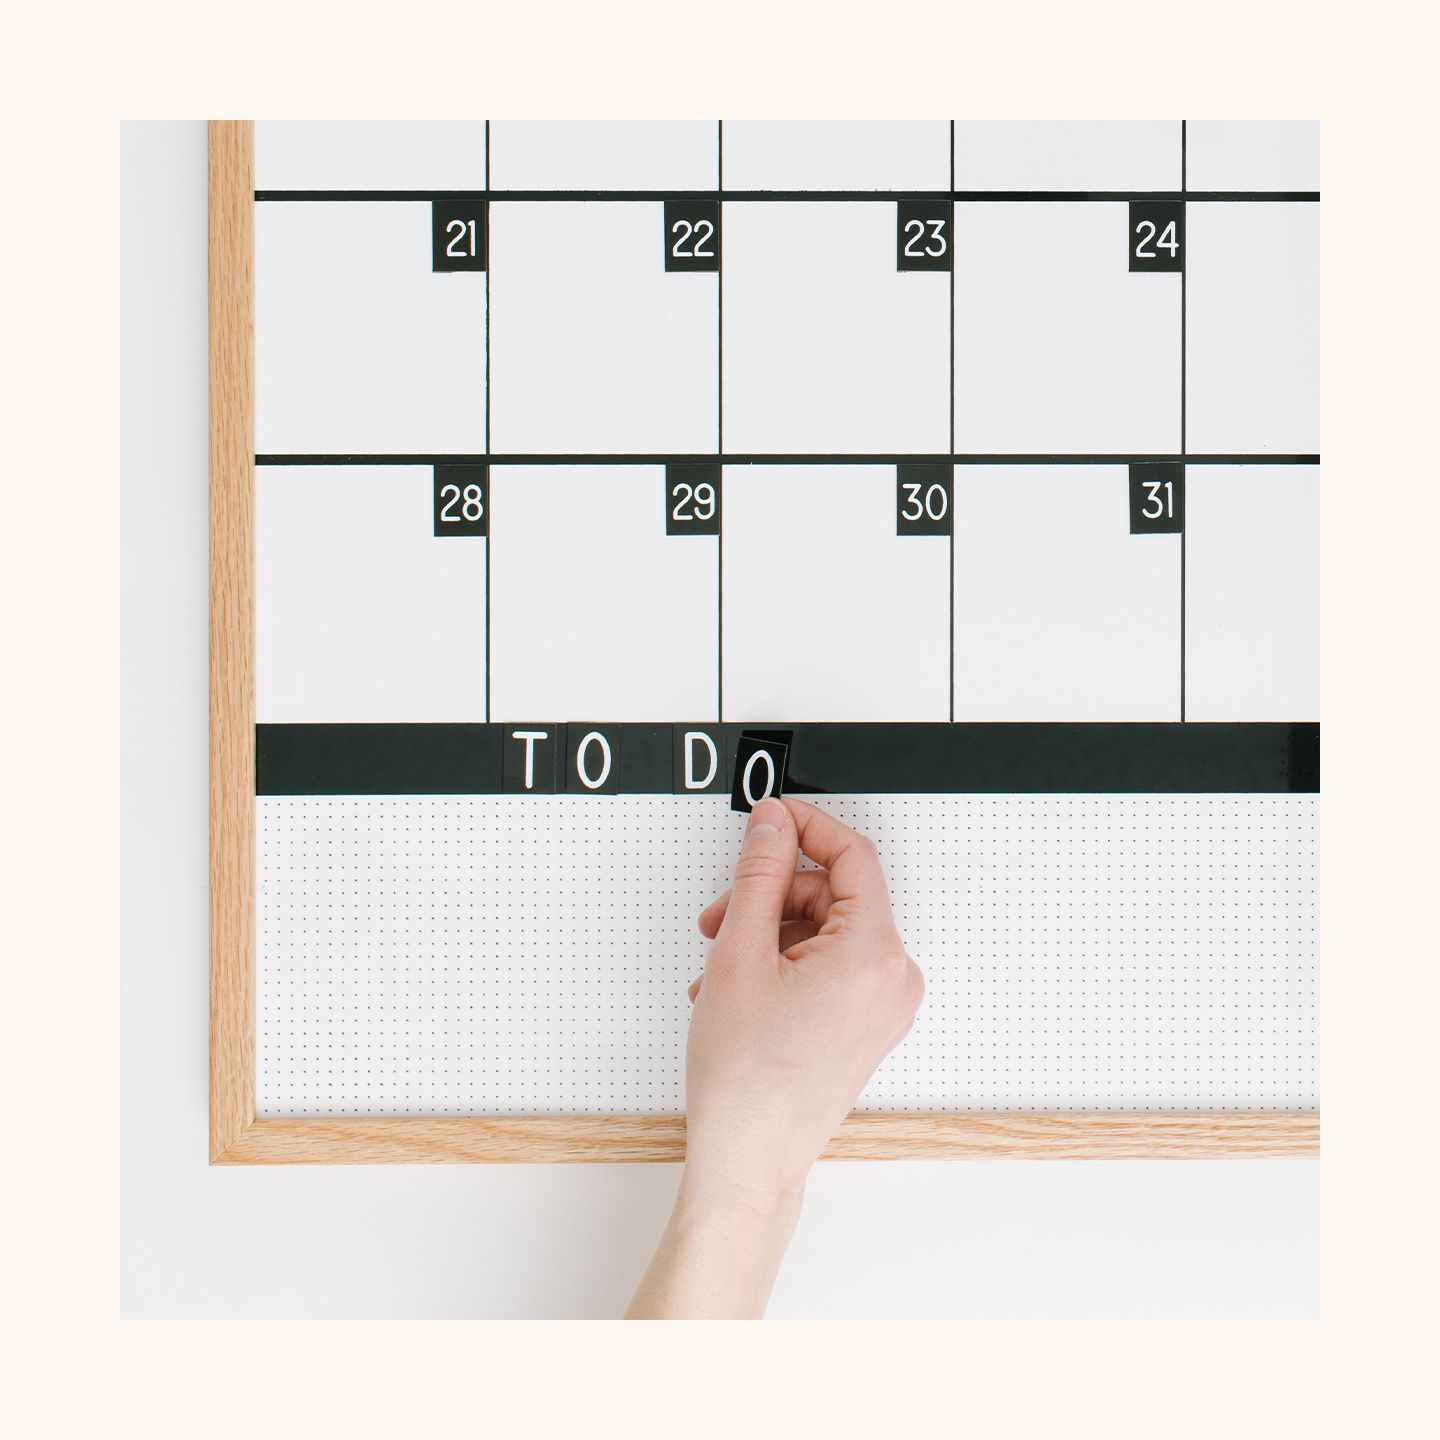 A hand putting on letters on a block calendar.